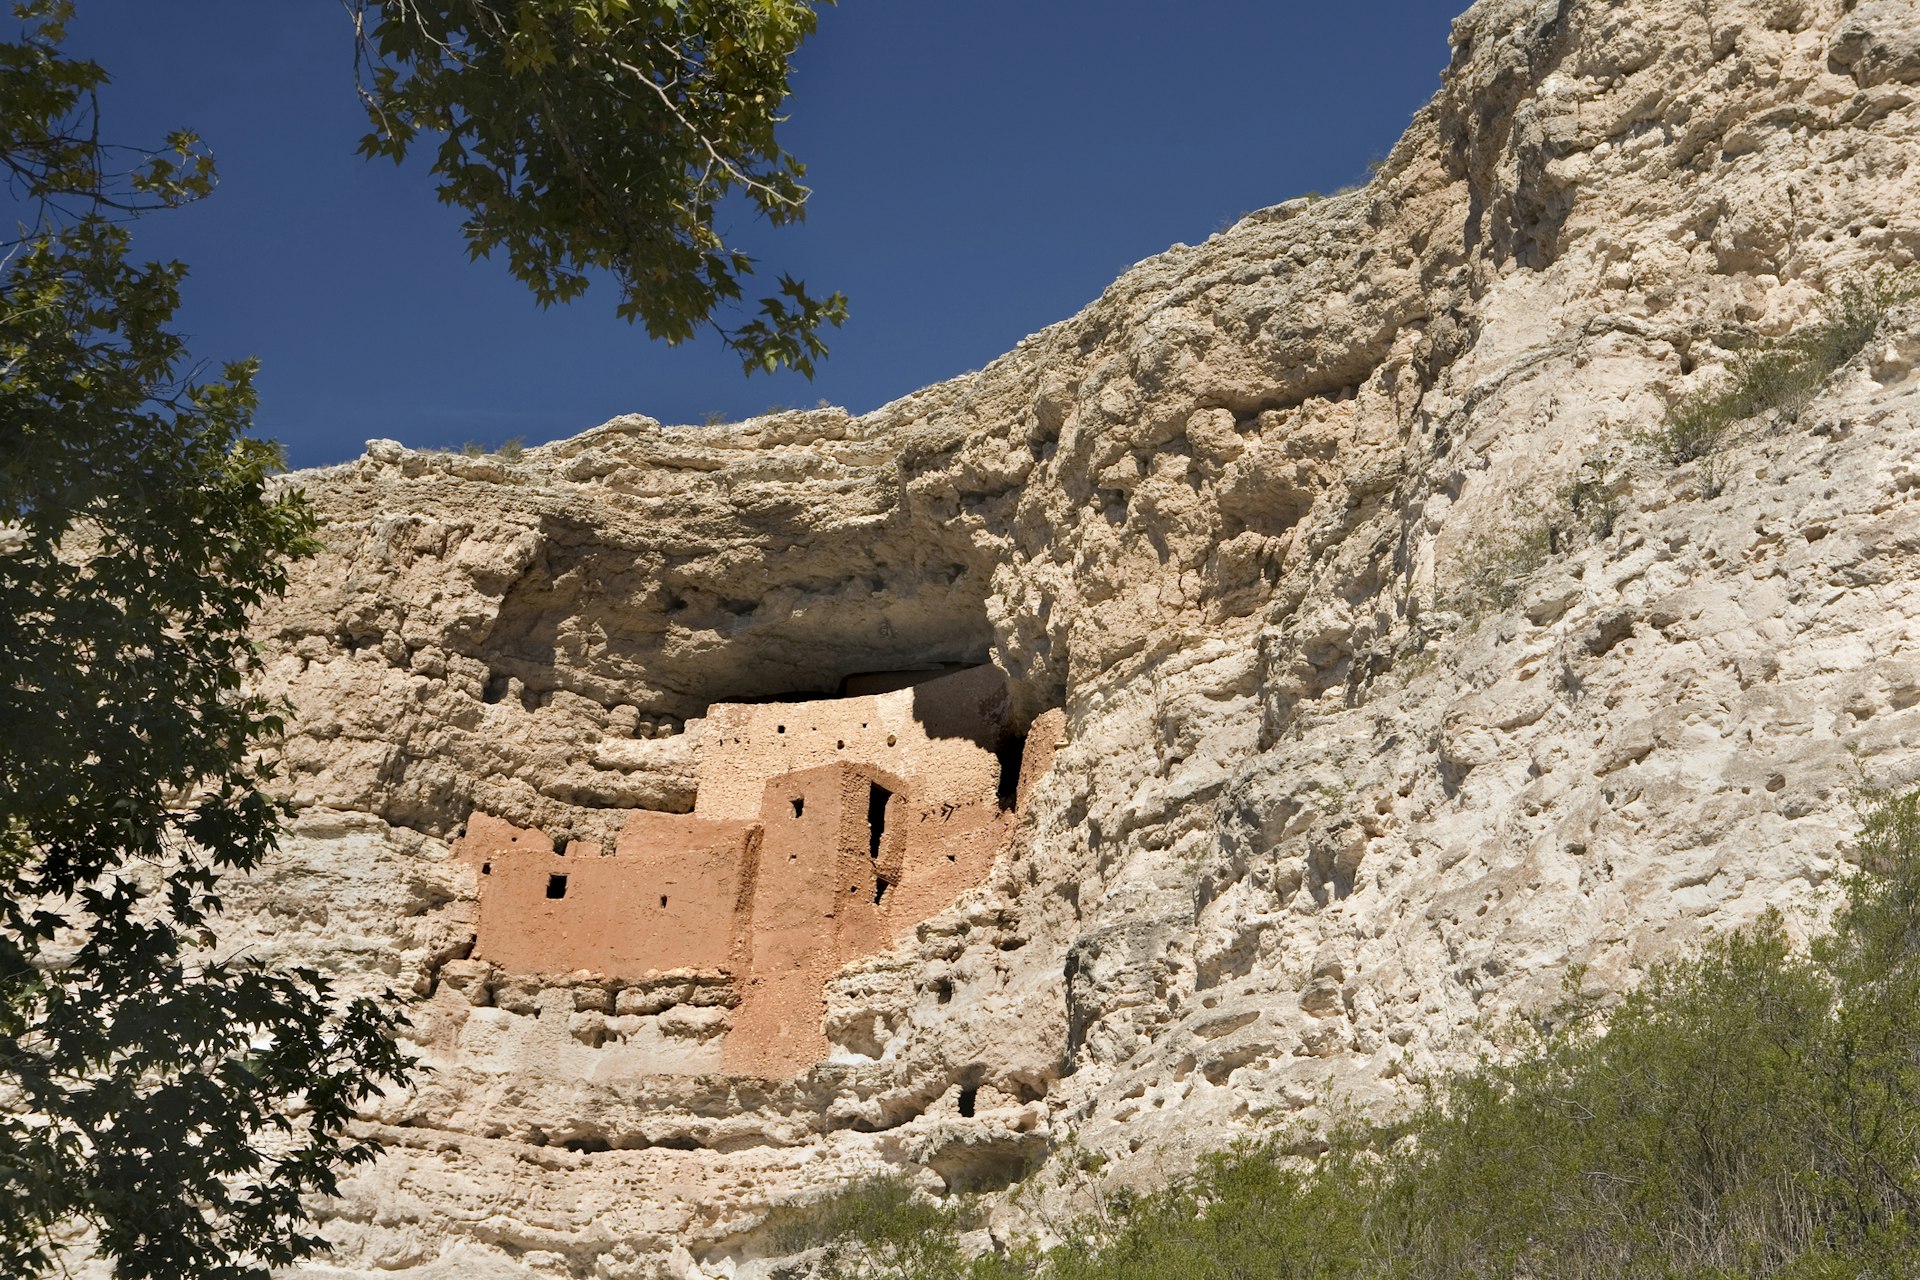 A prehistoric pueblo in the side of a cliff at Montezuma Castle in Arizona